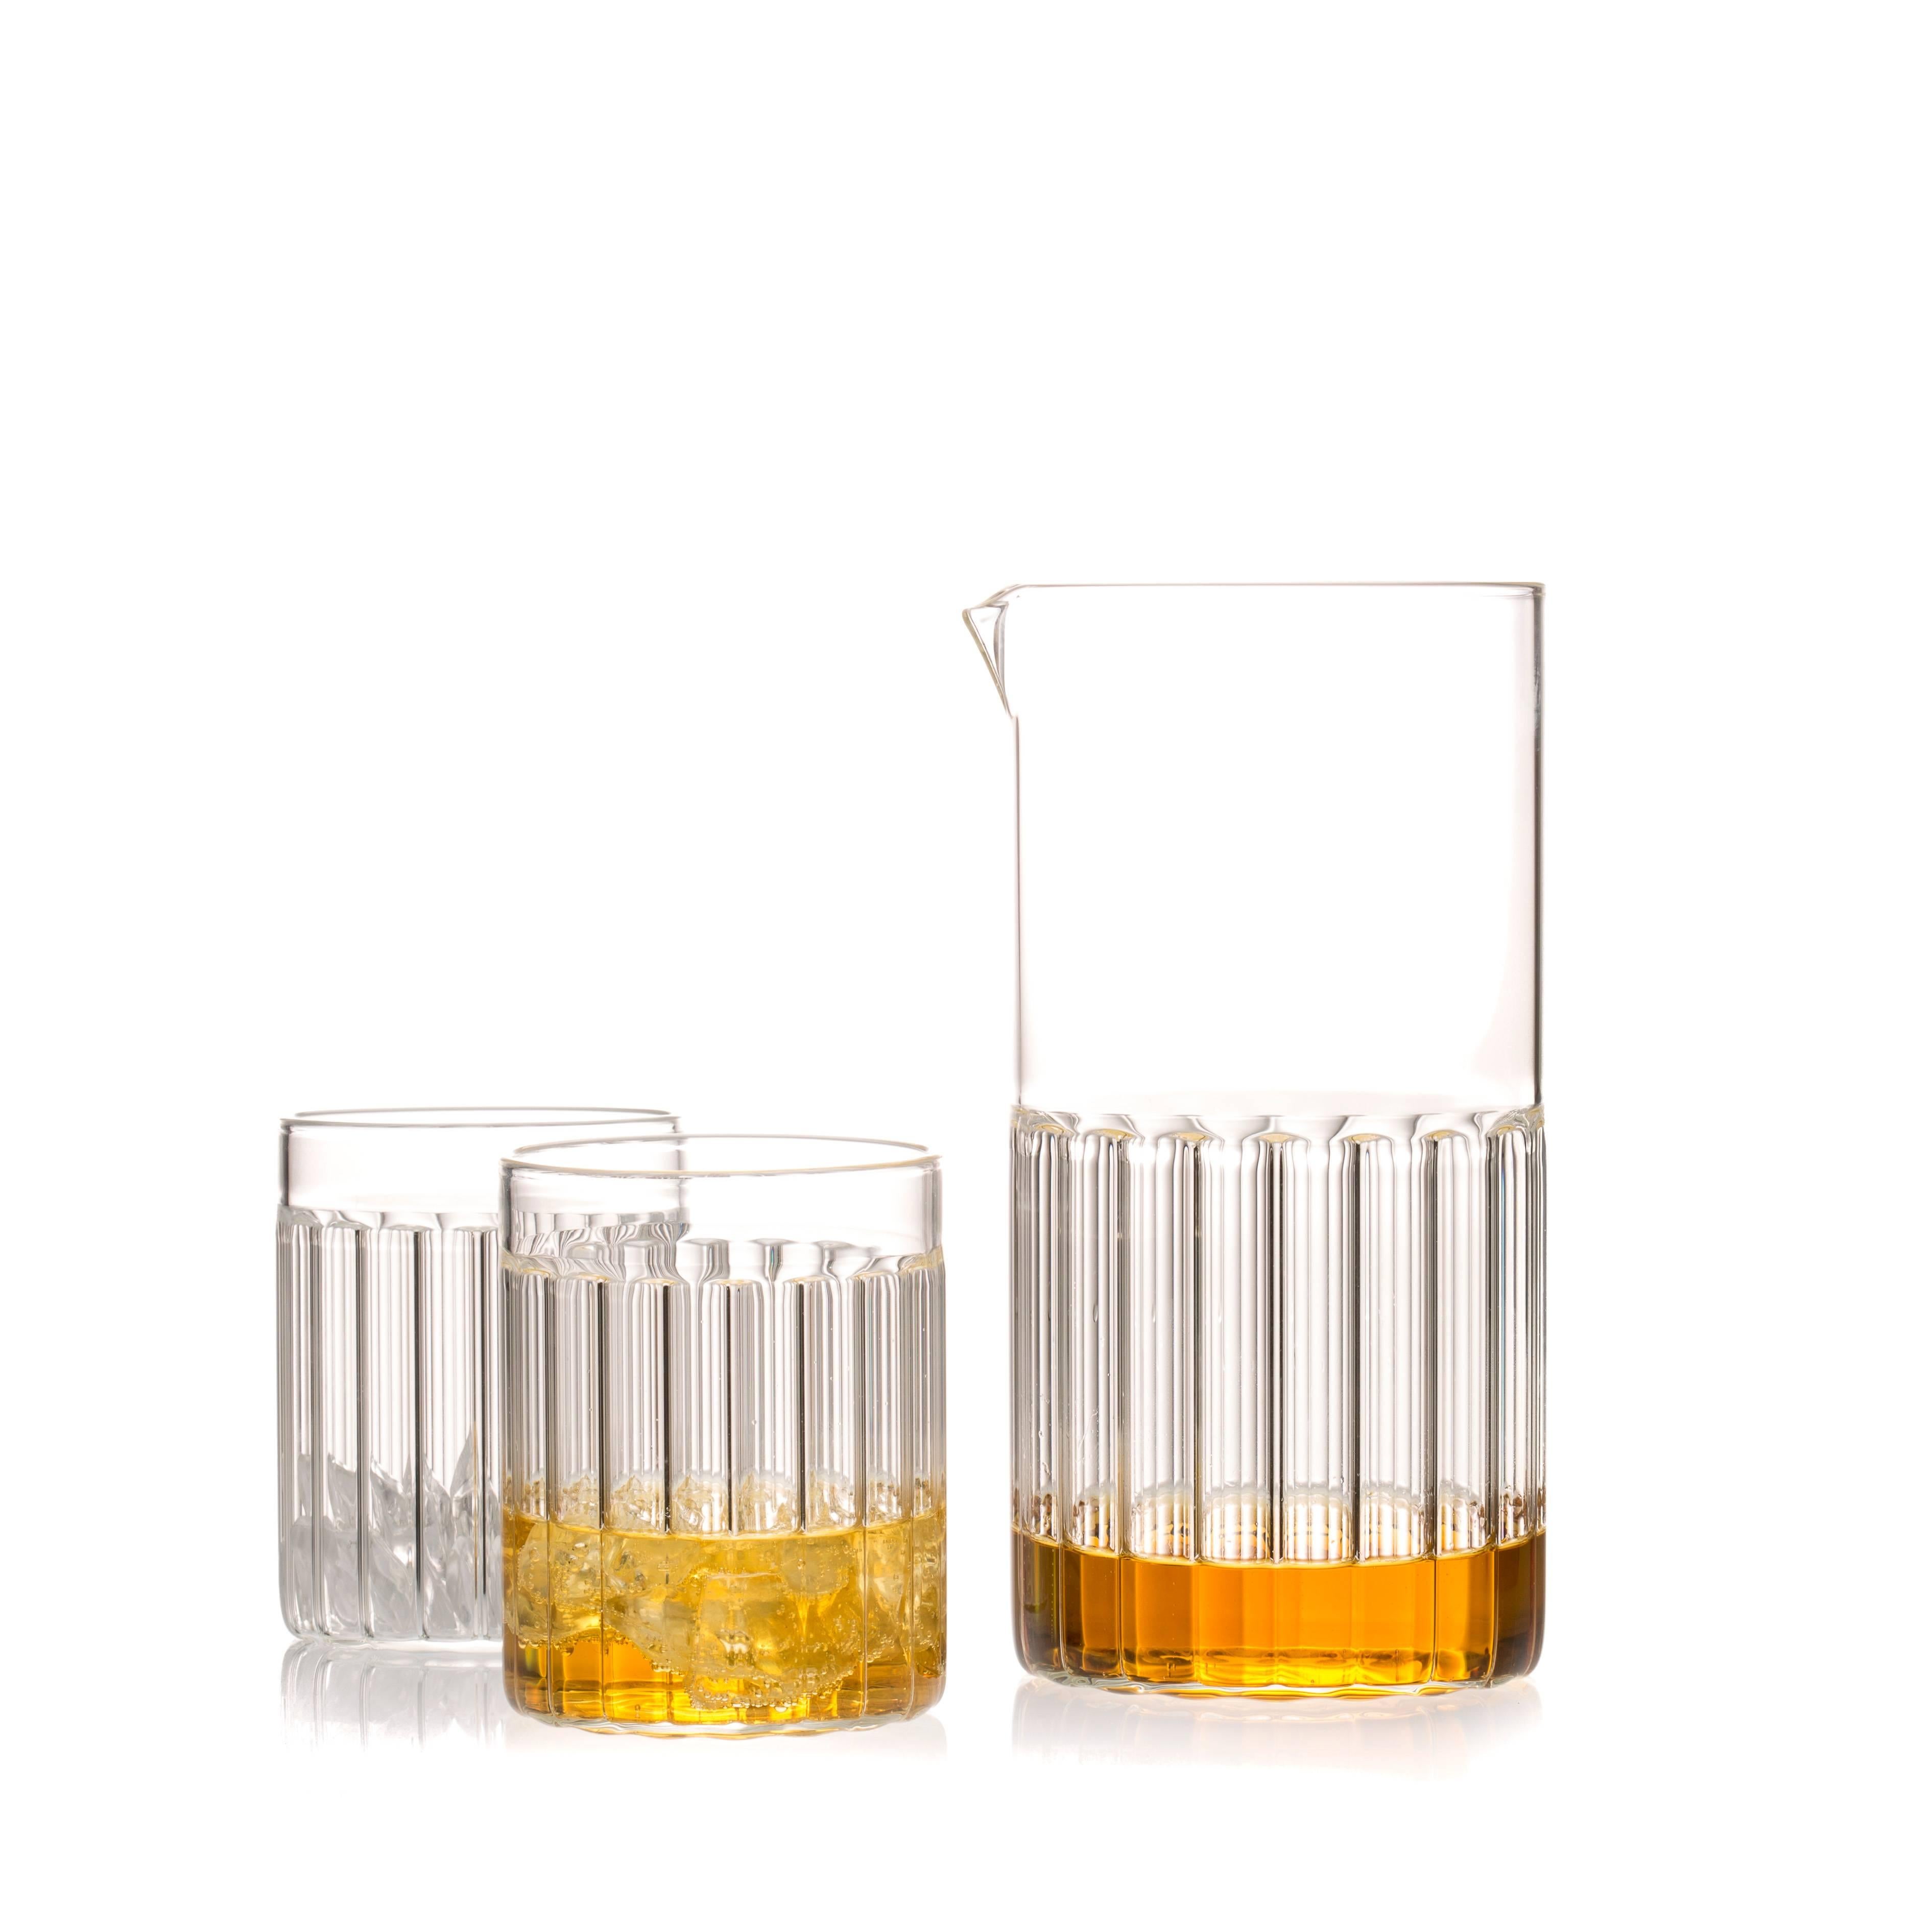 Just as the small town is known for the healing properties of its hot springs, so are the evenings we spend with good friends. The contemporary Bessho collection is elegant in its simplicity of modern form and use of glass. The handcrafted Czech